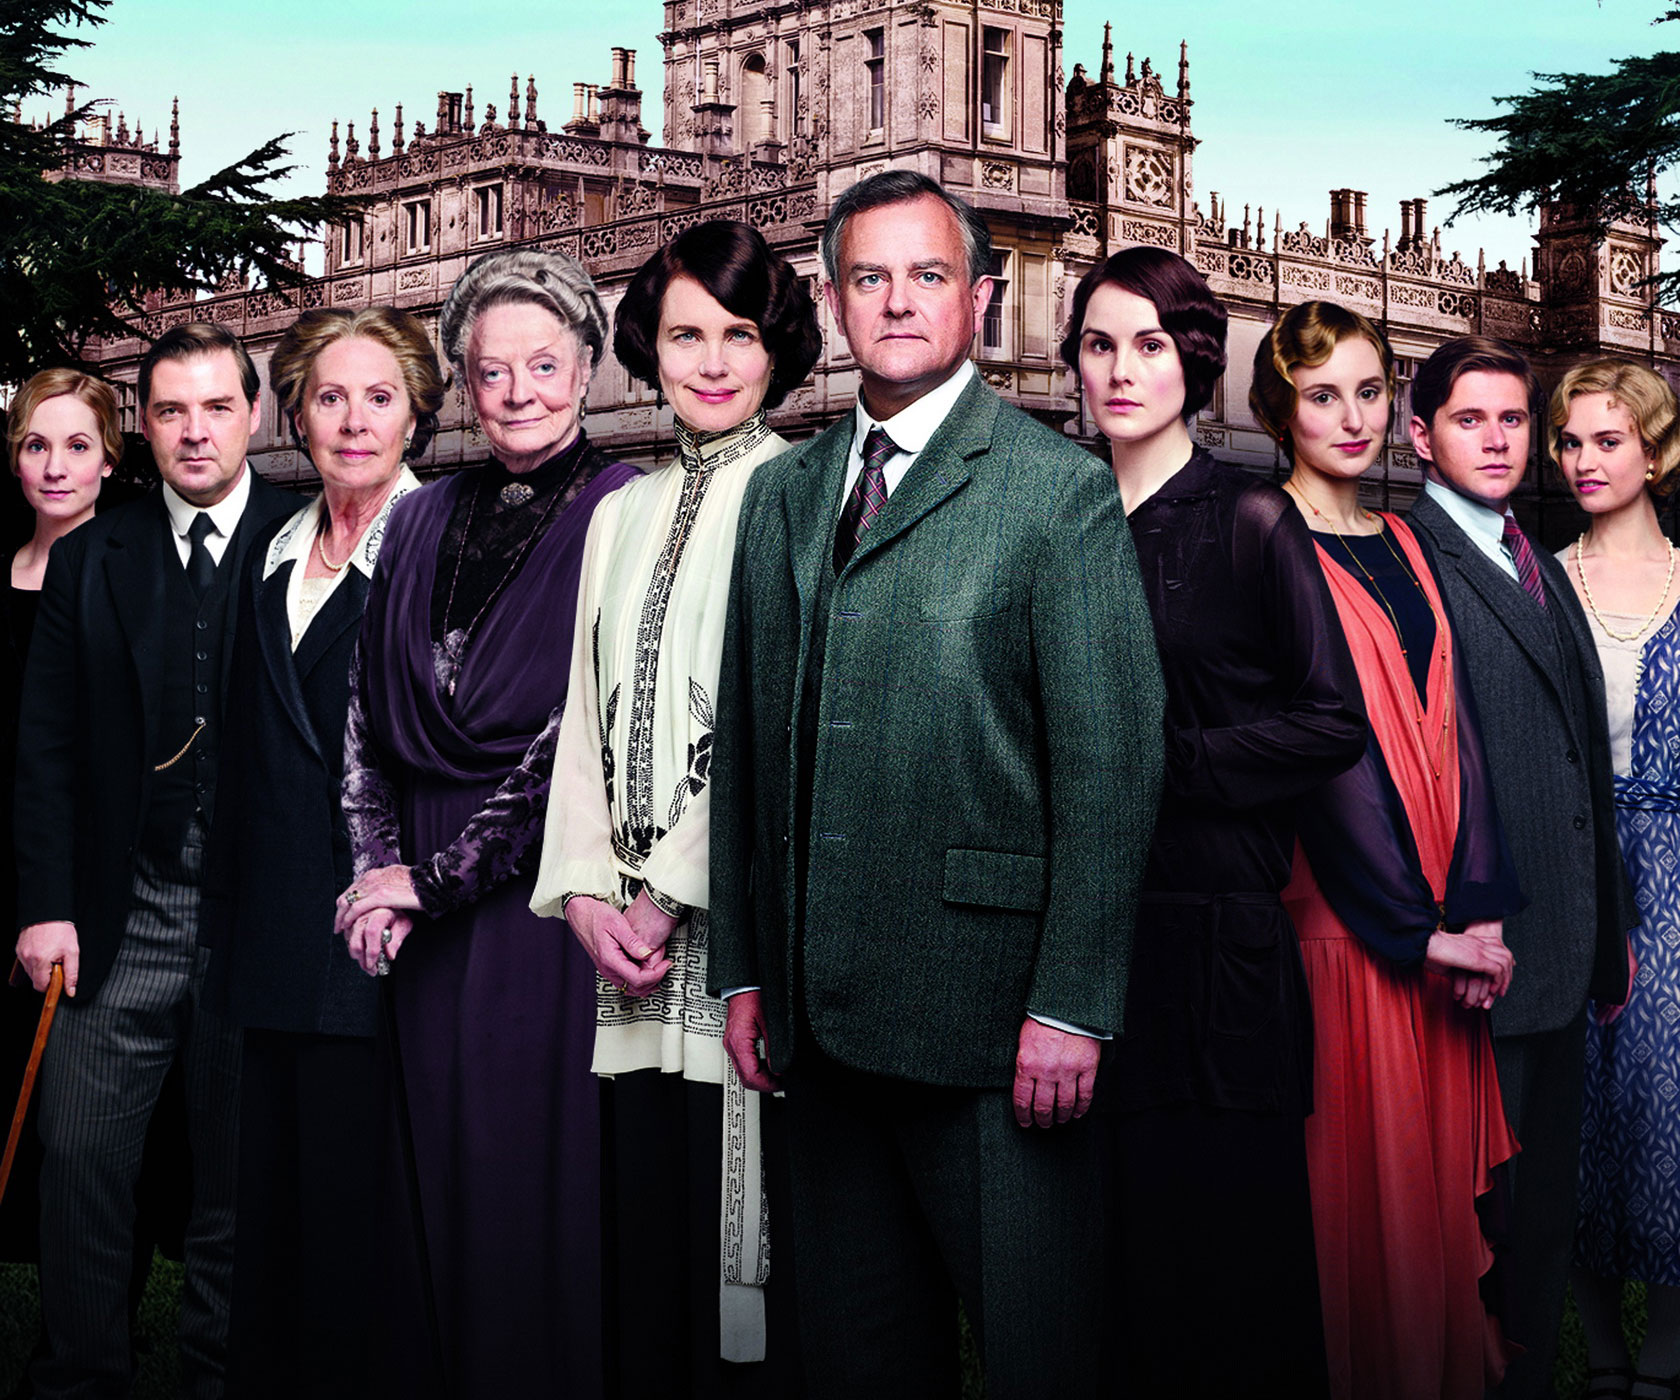 One major star won’t be returning for Downton Abbey movie reboot